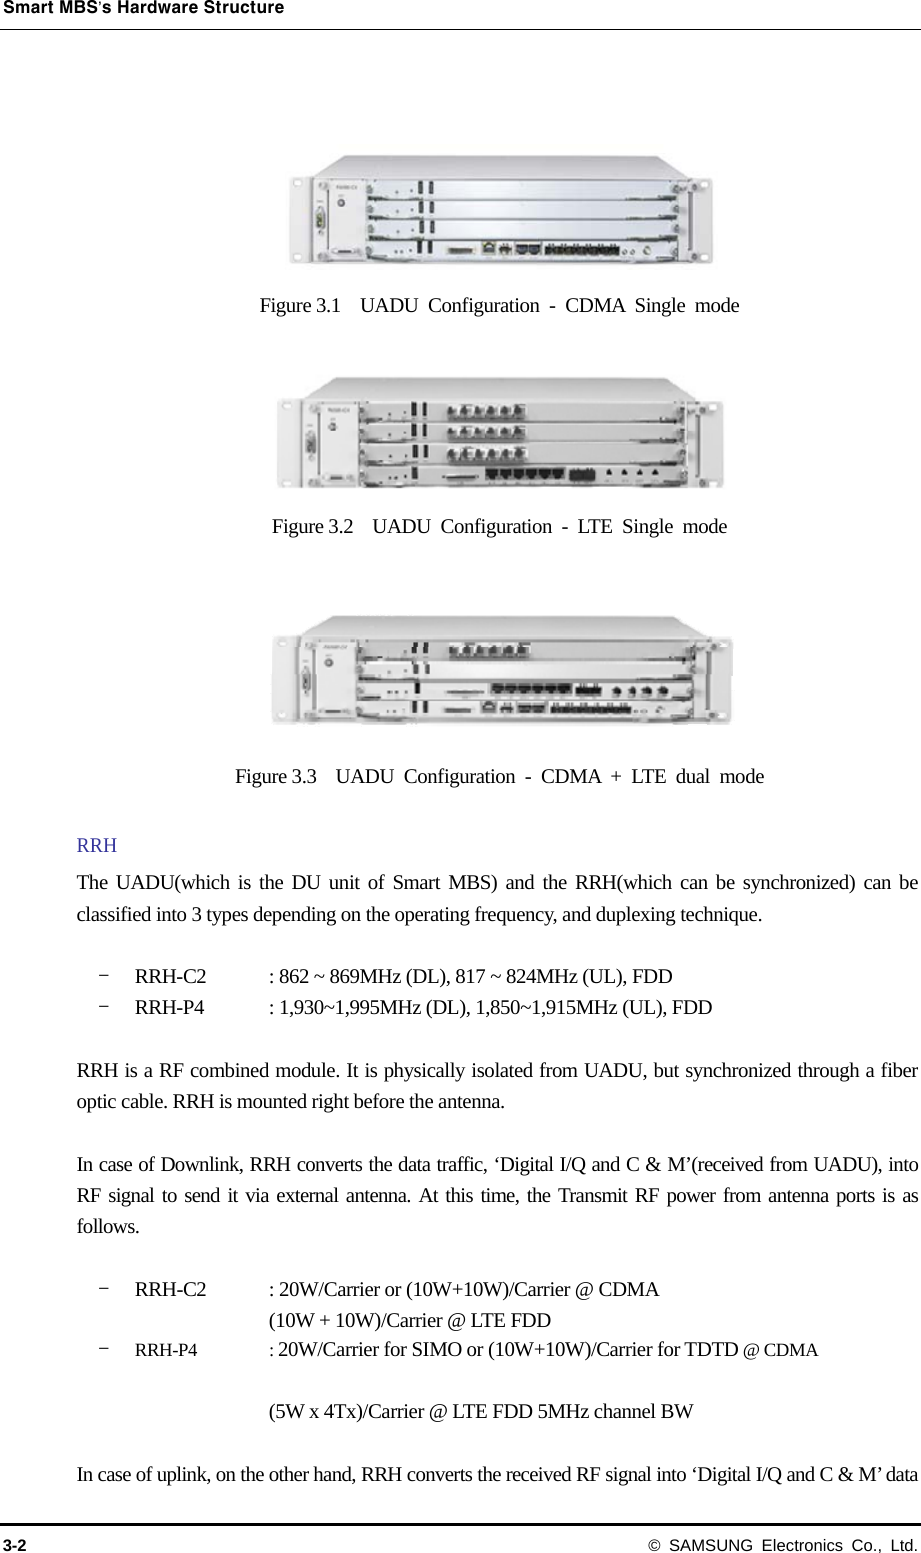 Smart MBS’s Hardware Structure 3-2 © SAMSUNG Electronics Co., Ltd.   Figure 3.1  UADU Configuration - CDMA Single mode  Figure 3.2  UADU Configuration - LTE Single mode  Figure 3.3  UADU Configuration - CDMA + LTE dual mode  RRH The UADU(which is the DU unit of Smart MBS) and the RRH(which can be synchronized) can be classified into 3 types depending on the operating frequency, and duplexing technique.  - RRH-C2    : 862 ~ 869MHz (DL), 817 ~ 824MHz (UL), FDD - RRH-P4  : 1,930~1,995MHz (DL), 1,850~1,915MHz (UL), FDD    RRH is a RF combined module. It is physically isolated from UADU, but synchronized through a fiber optic cable. RRH is mounted right before the antenna.  In case of Downlink, RRH converts the data traffic, ‘Digital I/Q and C &amp; M’(received from UADU), into RF signal to send it via external antenna. At this time, the Transmit RF power from antenna ports is as follows.  - RRH-C2  : 20W/Carrier or (10W+10W)/Carrier @ CDMA (10W + 10W)/Carrier @ LTE FDD - RRH-P4 : 20W/Carrier for SIMO or (10W+10W)/Carrier for TDTD @ CDMA  (5W x 4Tx)/Carrier @ LTE FDD 5MHz channel BW  In case of uplink, on the other hand, RRH converts the received RF signal into ‘Digital I/Q and C &amp; M’ data 